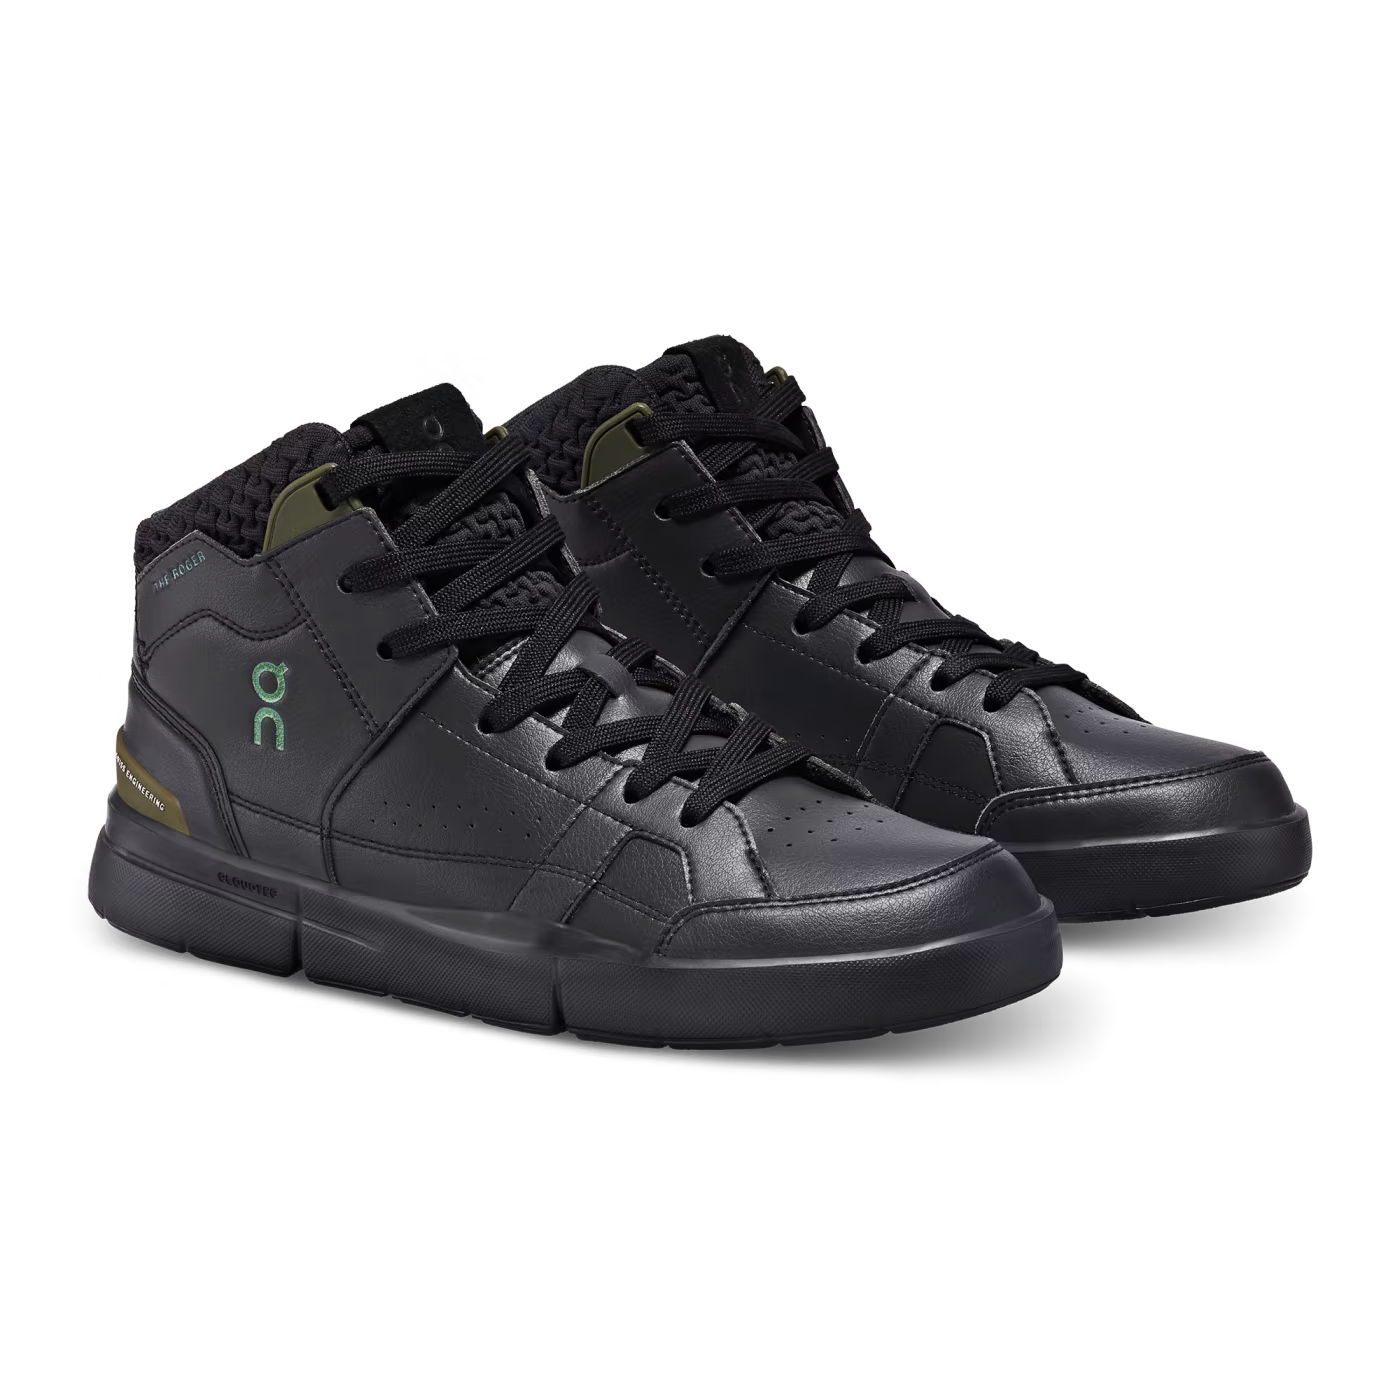 On Running  THE ROGER Clubhouse Sensa-3WD11621176-Shoes-W-Black|Camo-40.5-W9 